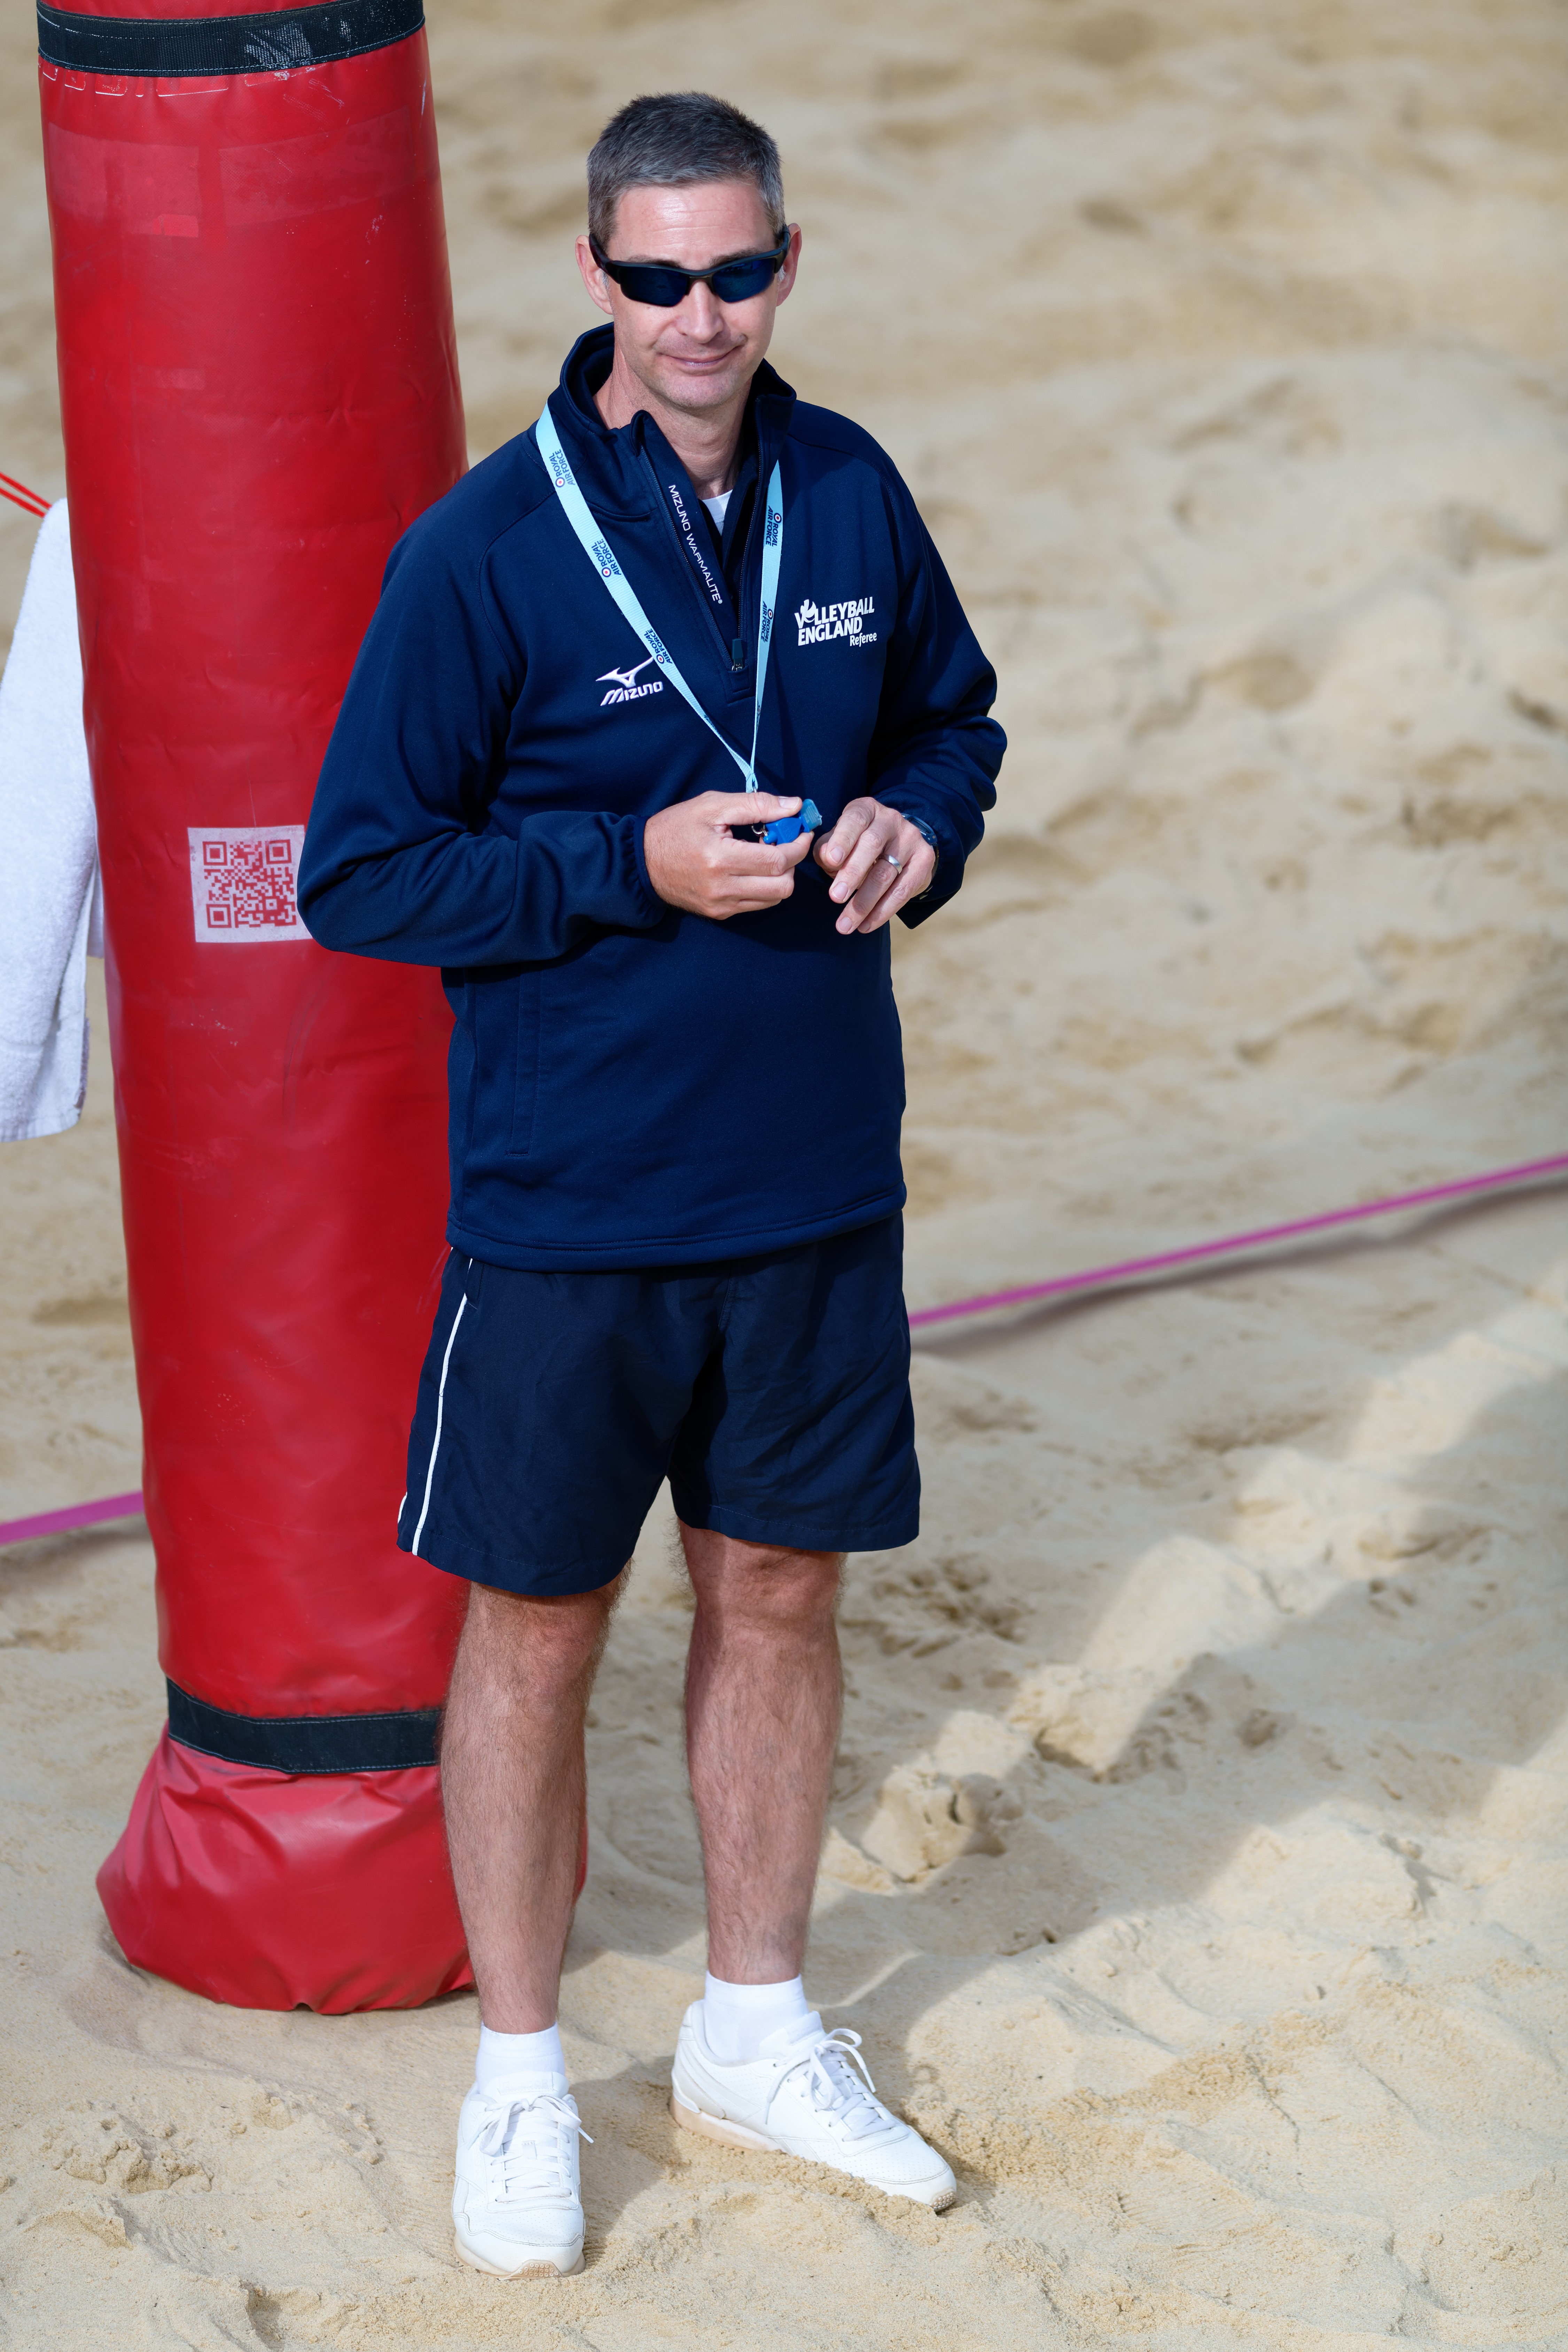 Image shows referee holding whistle on the beach.